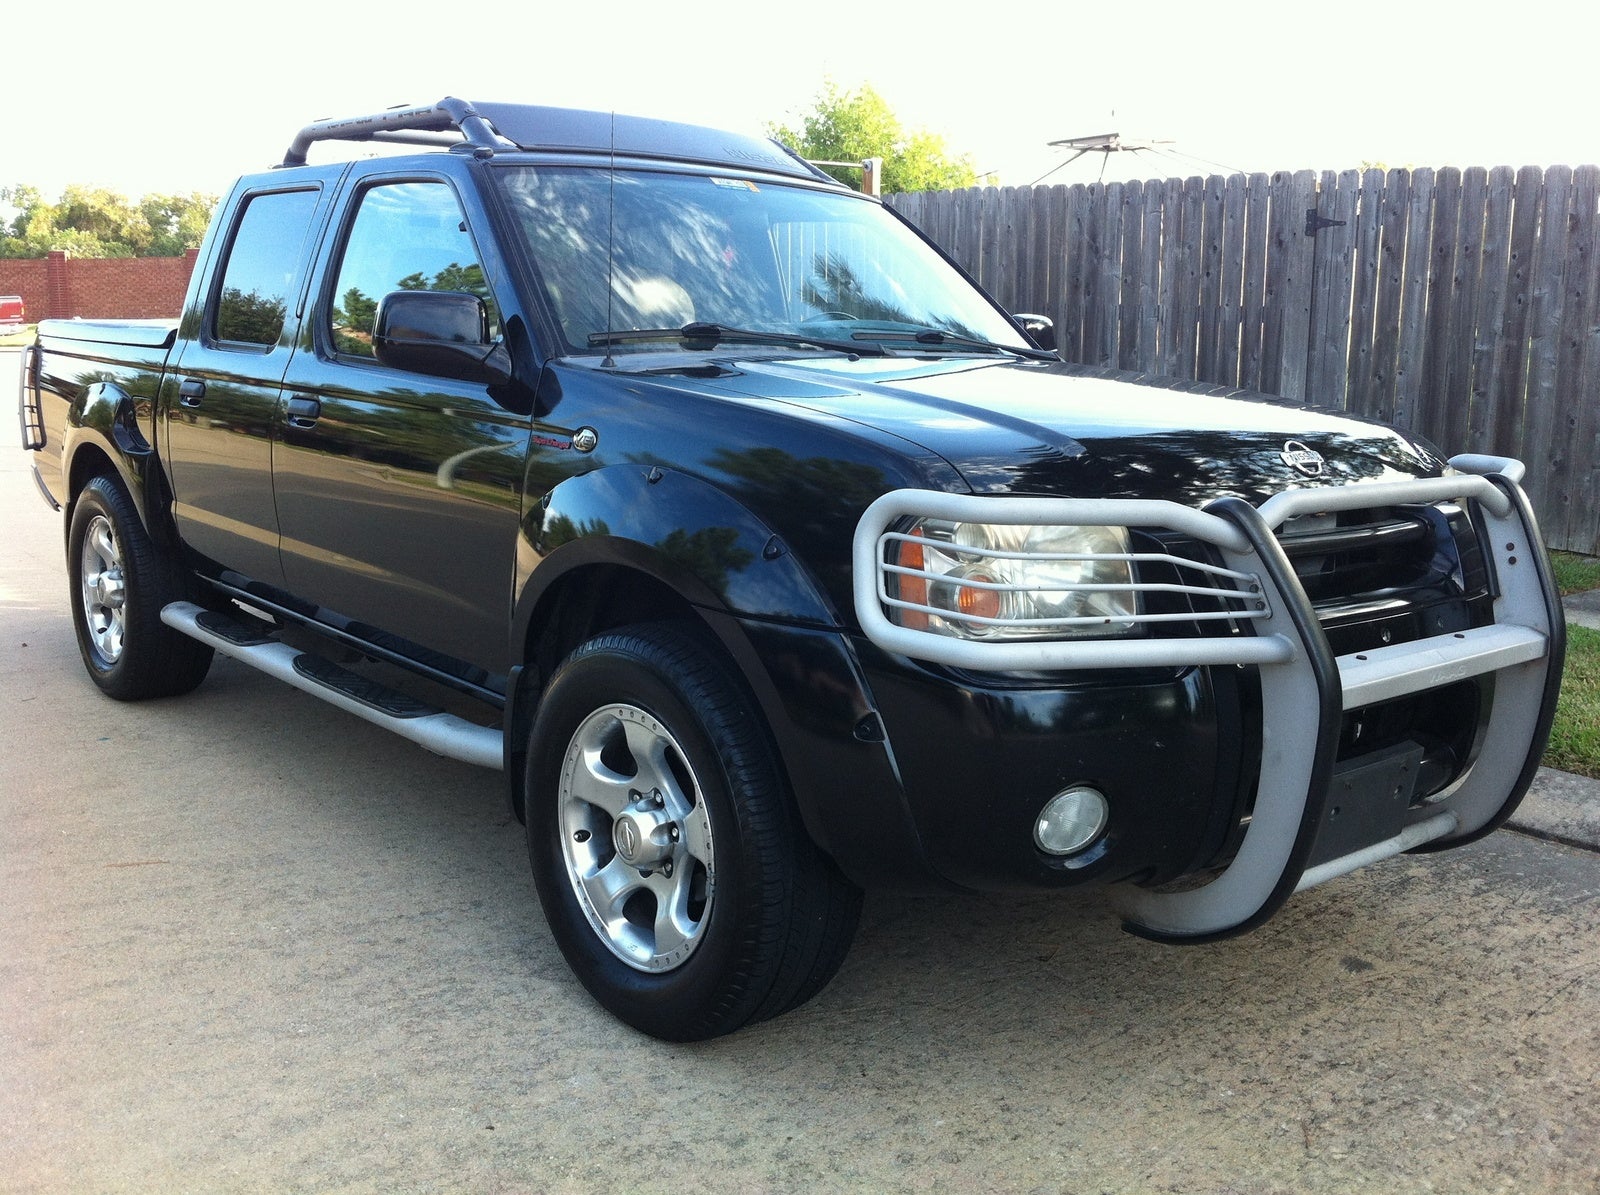 2001 Nissan frontier supercharged #2